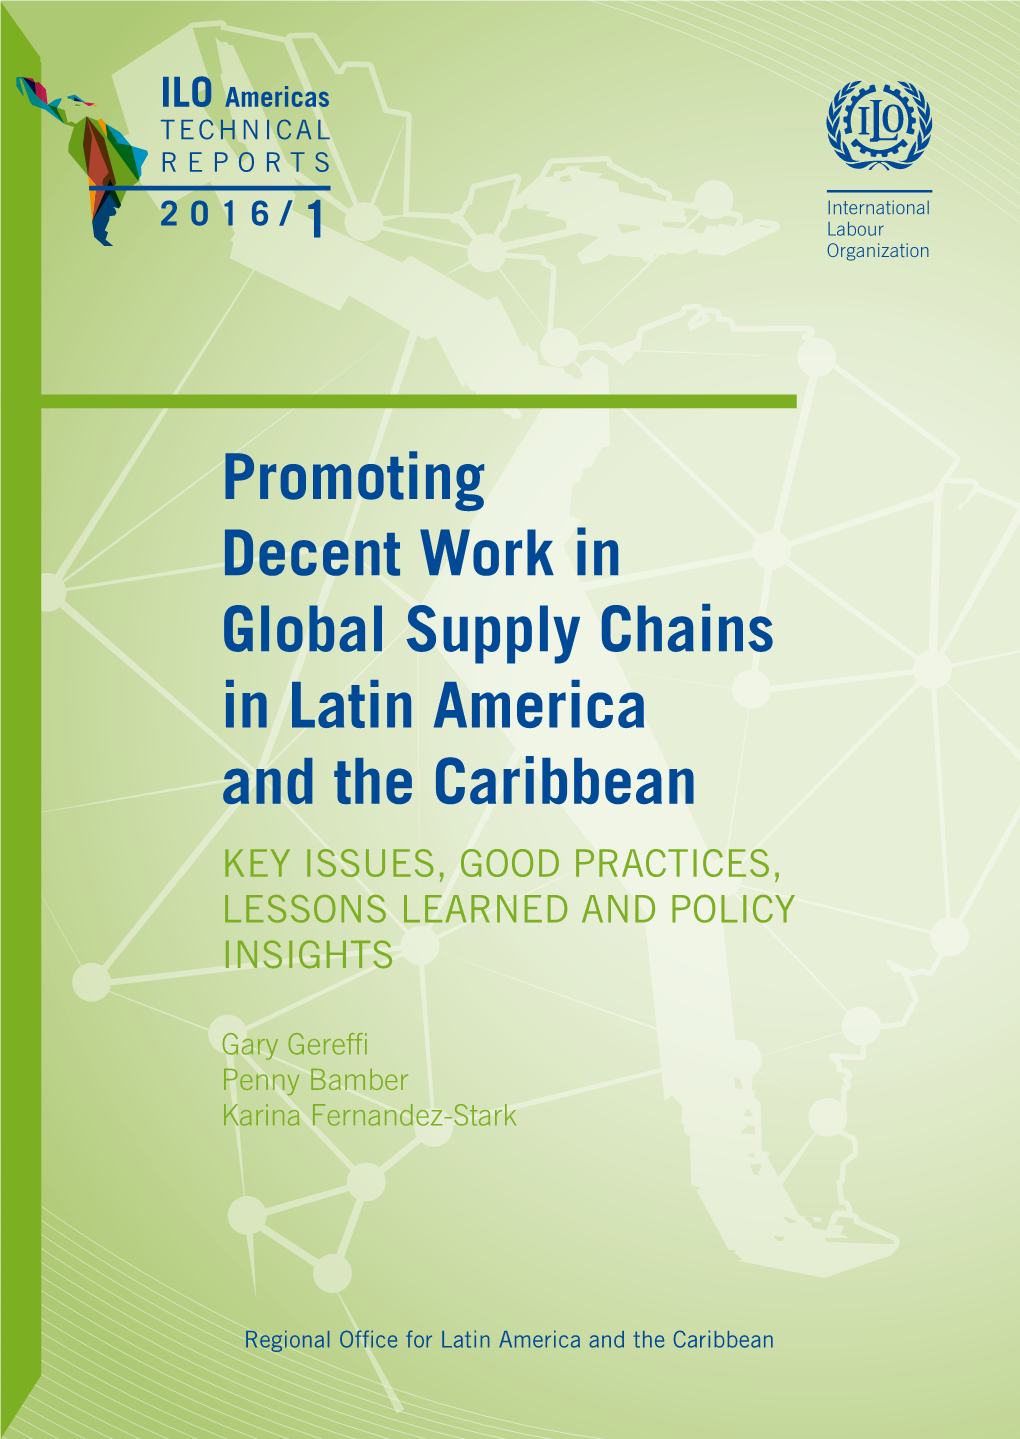 Promoting Decent Work in Global Supply Chains in Latin America and the Caribbean KEY ISSUES, GOOD PRACTICES, LESSONS LEARNED and POLICY INSIGHTS